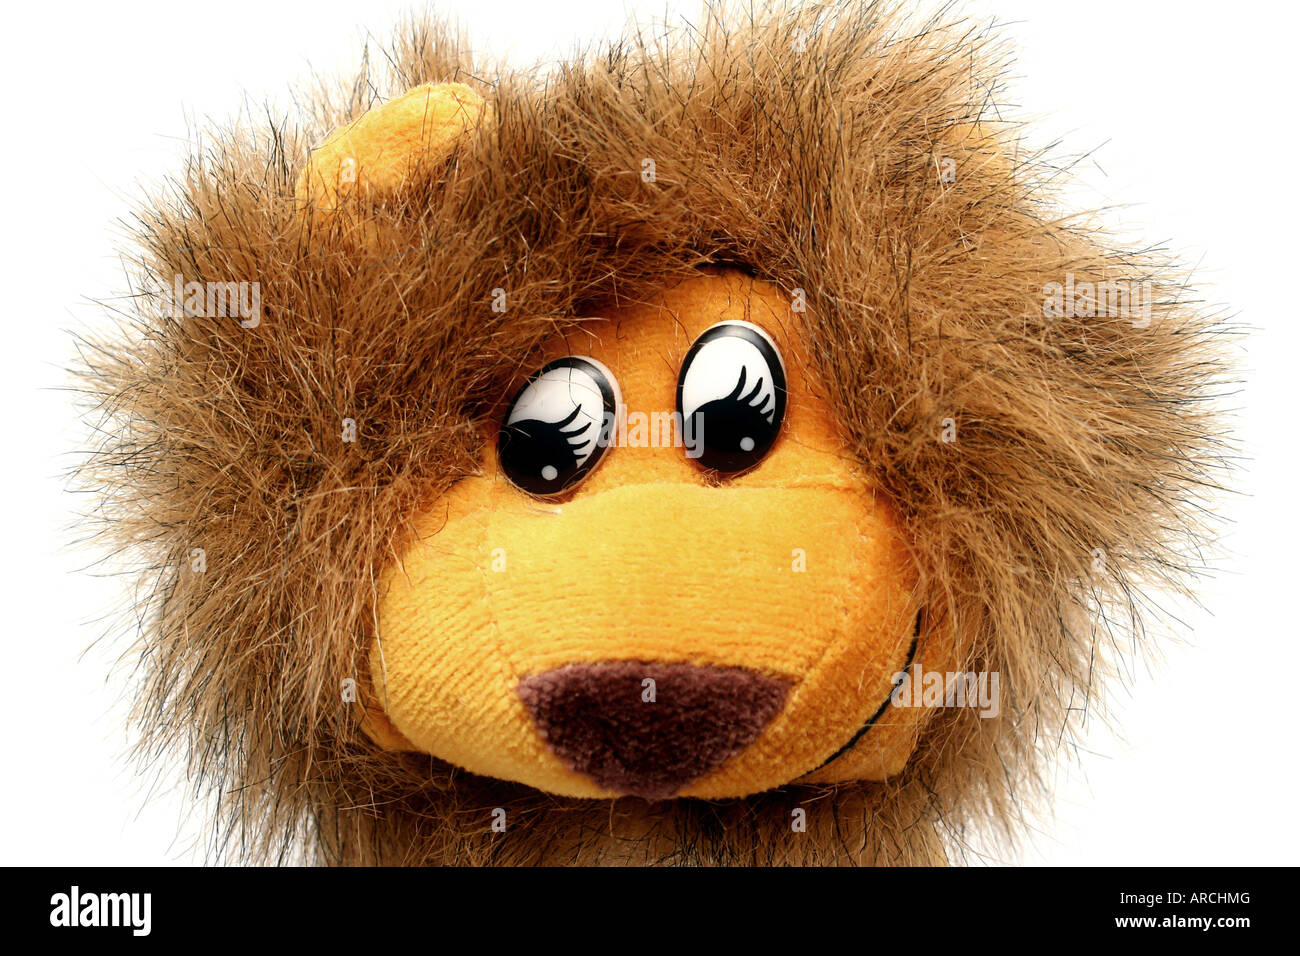 Closeup image of a lion toy; isolated on white Stock Photo